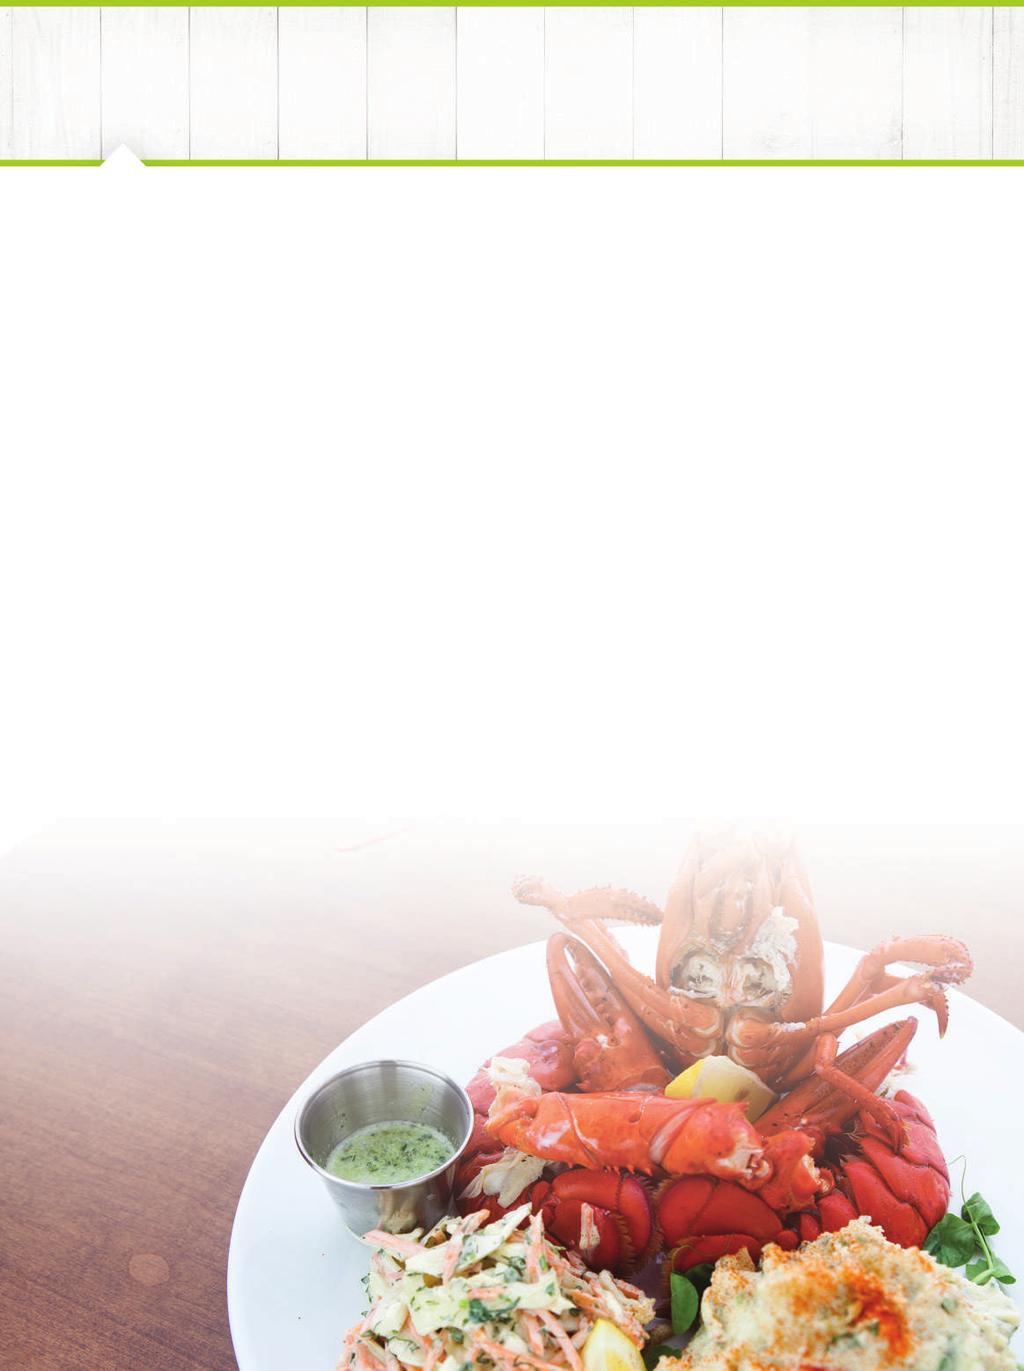 18 TRADITIONAL LOBSTER FEED $MARKET PRICE Buffet Dinners Prices do not include applicable tax or gratuity.